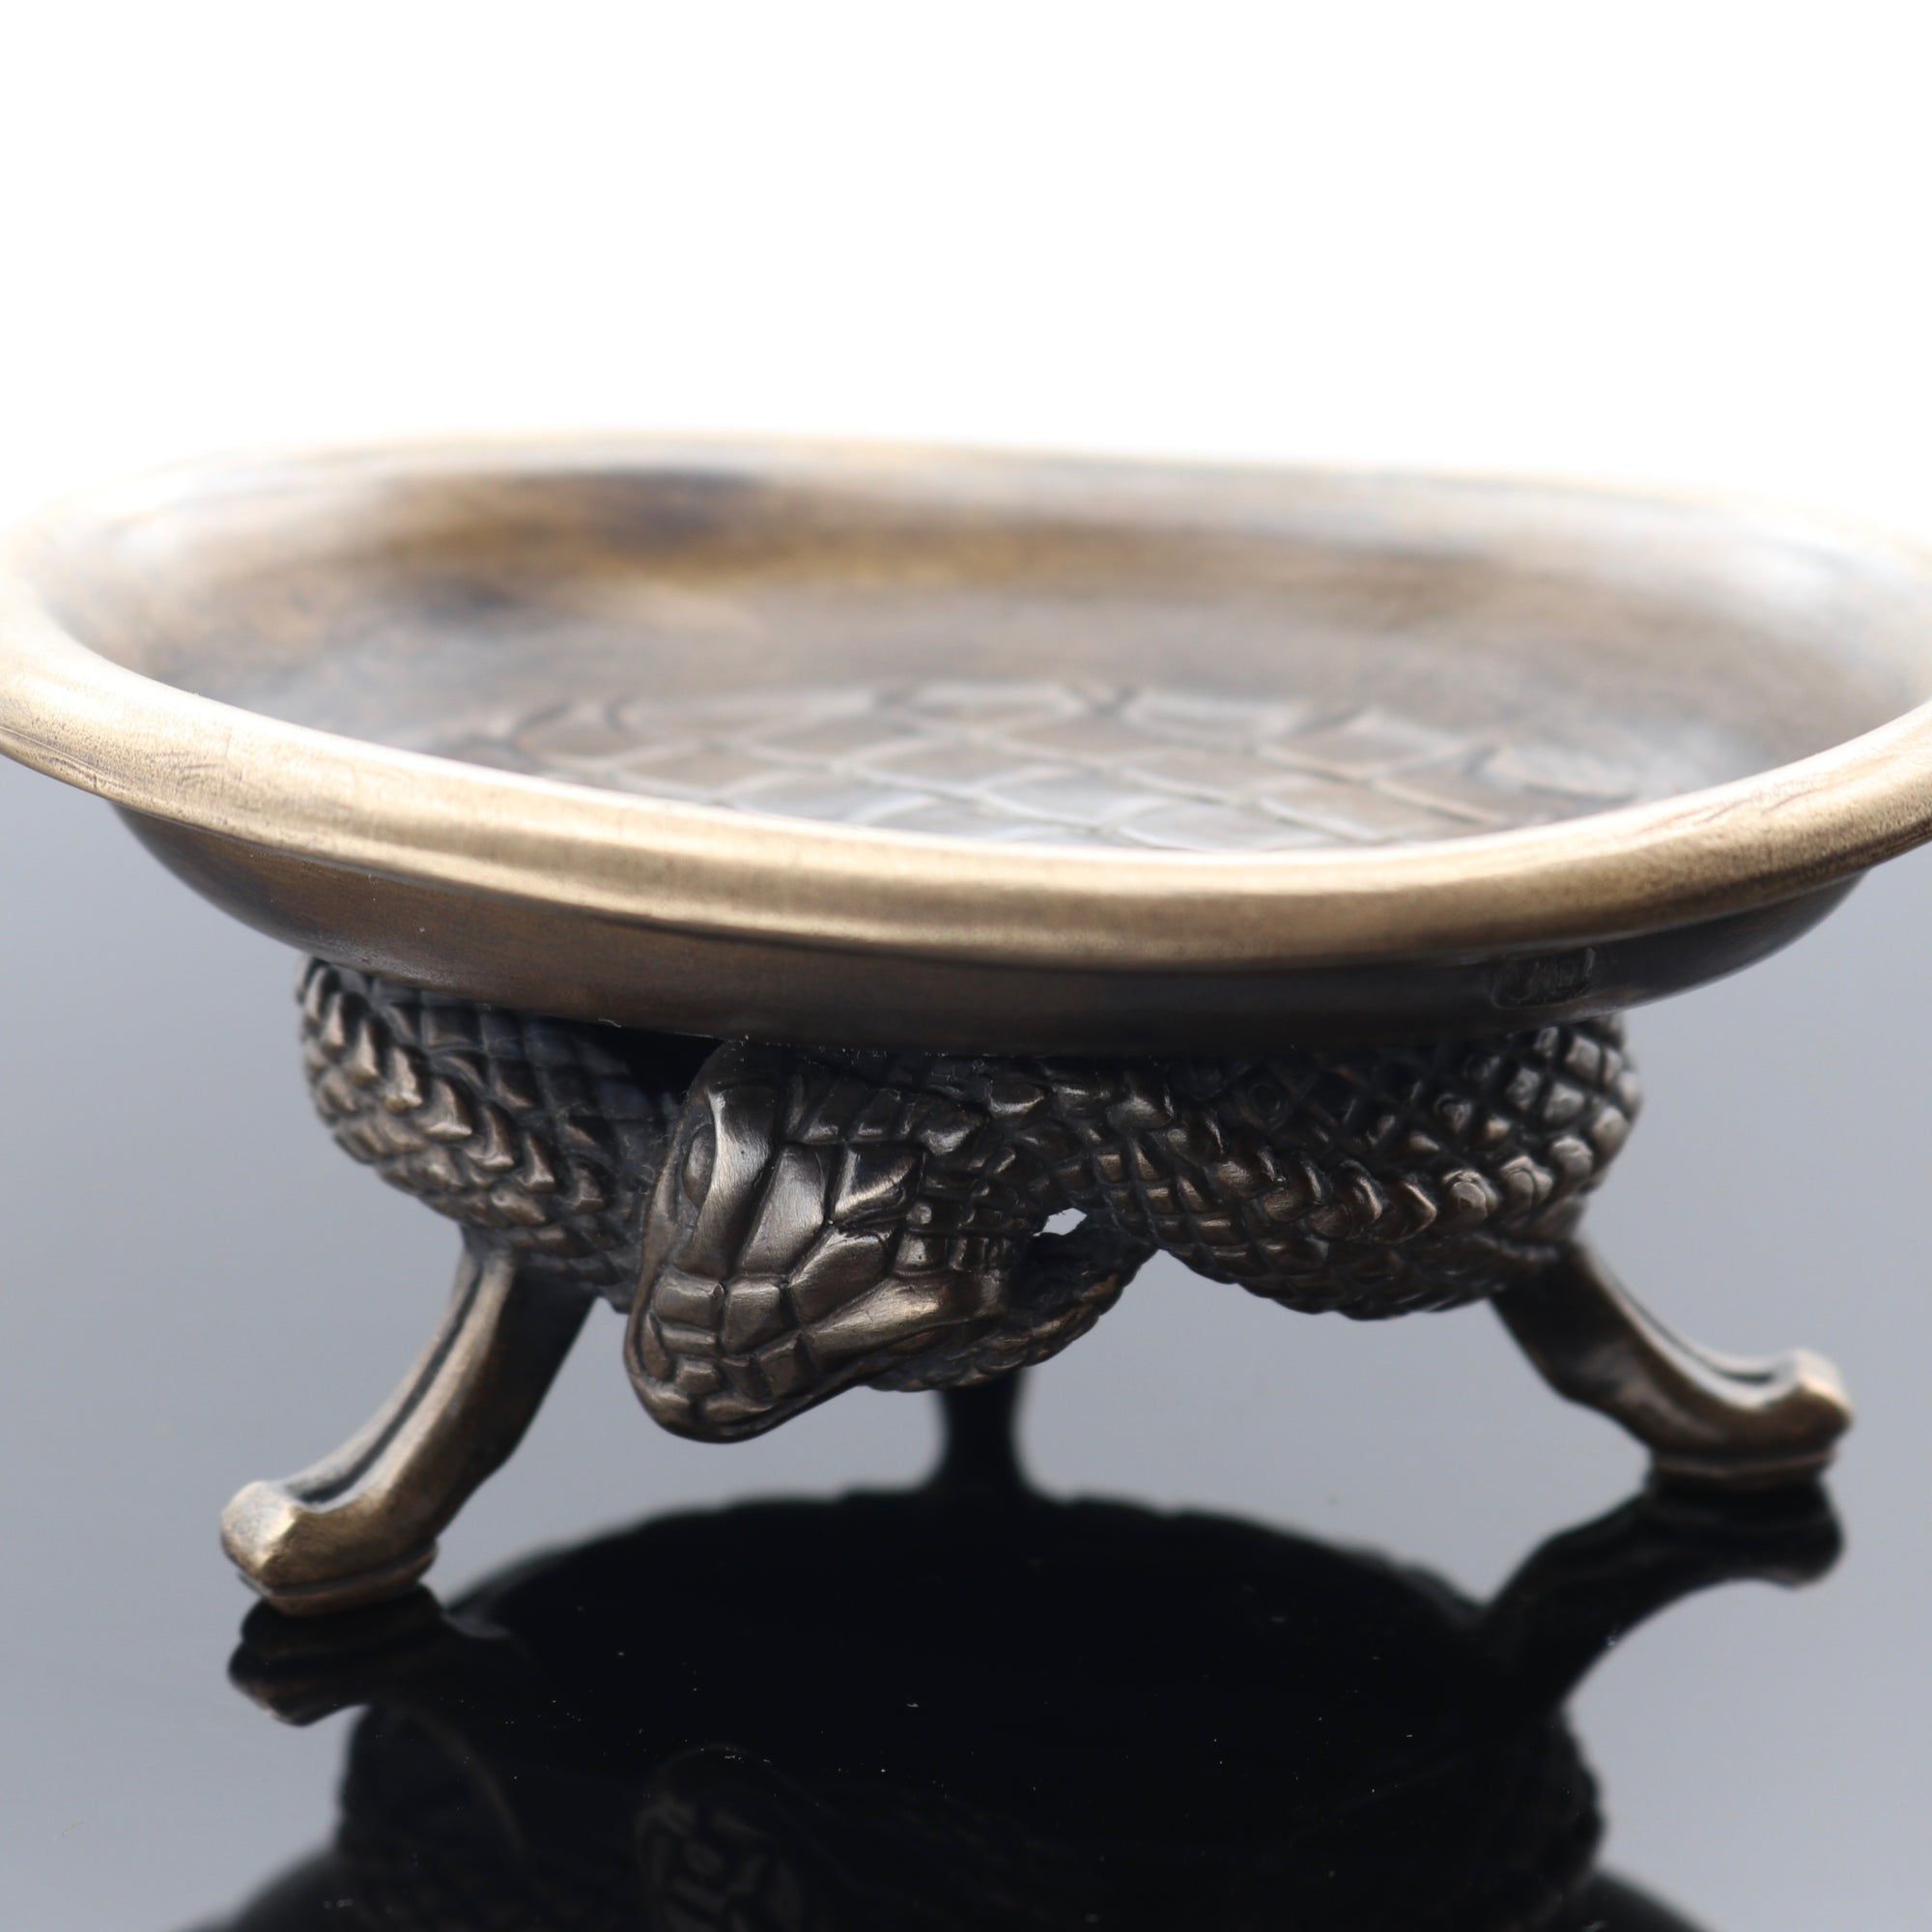 The Bronze Coiled Snake Footed Desk Valet in Bronze. The oval dish is carved with Snake Skin detail and will fit keys or other small items.